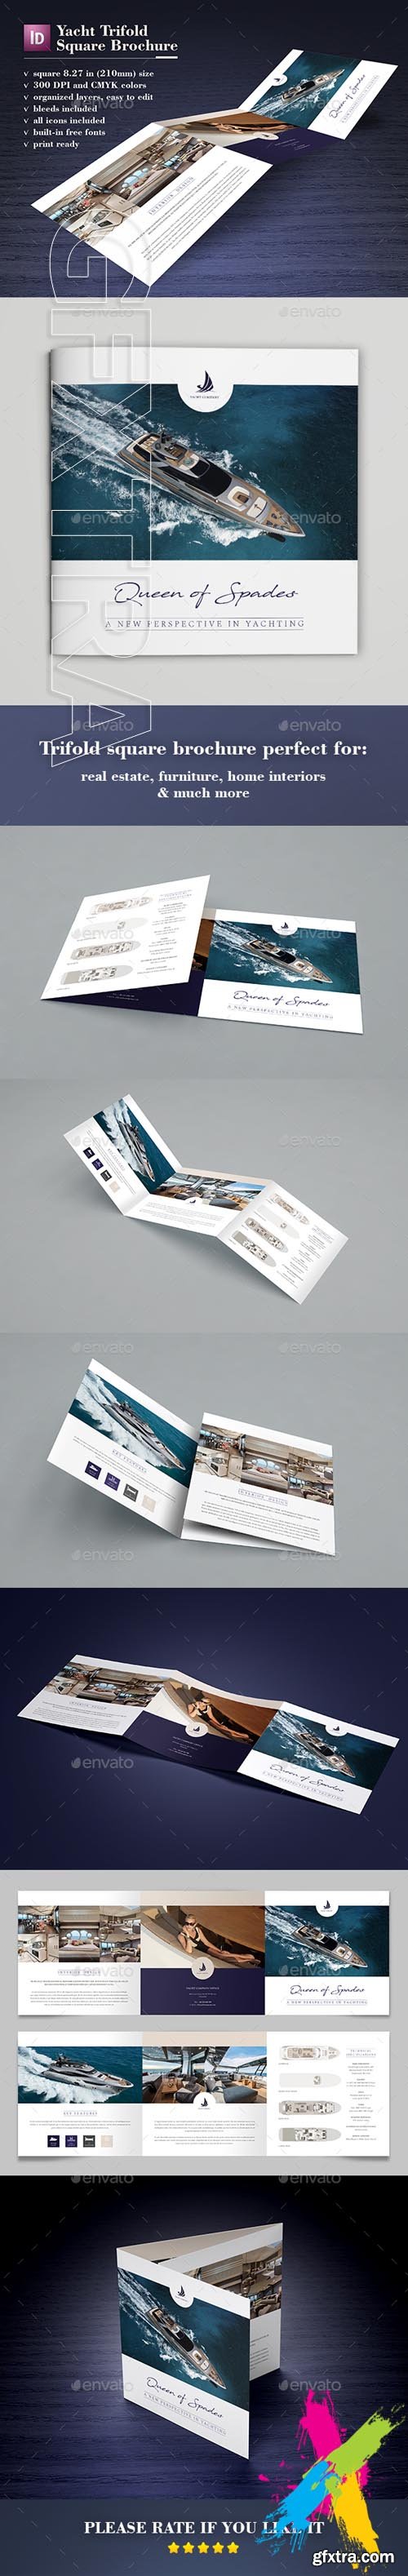 GraphicRiver - Yacht Trifold Square Brochure 20405848